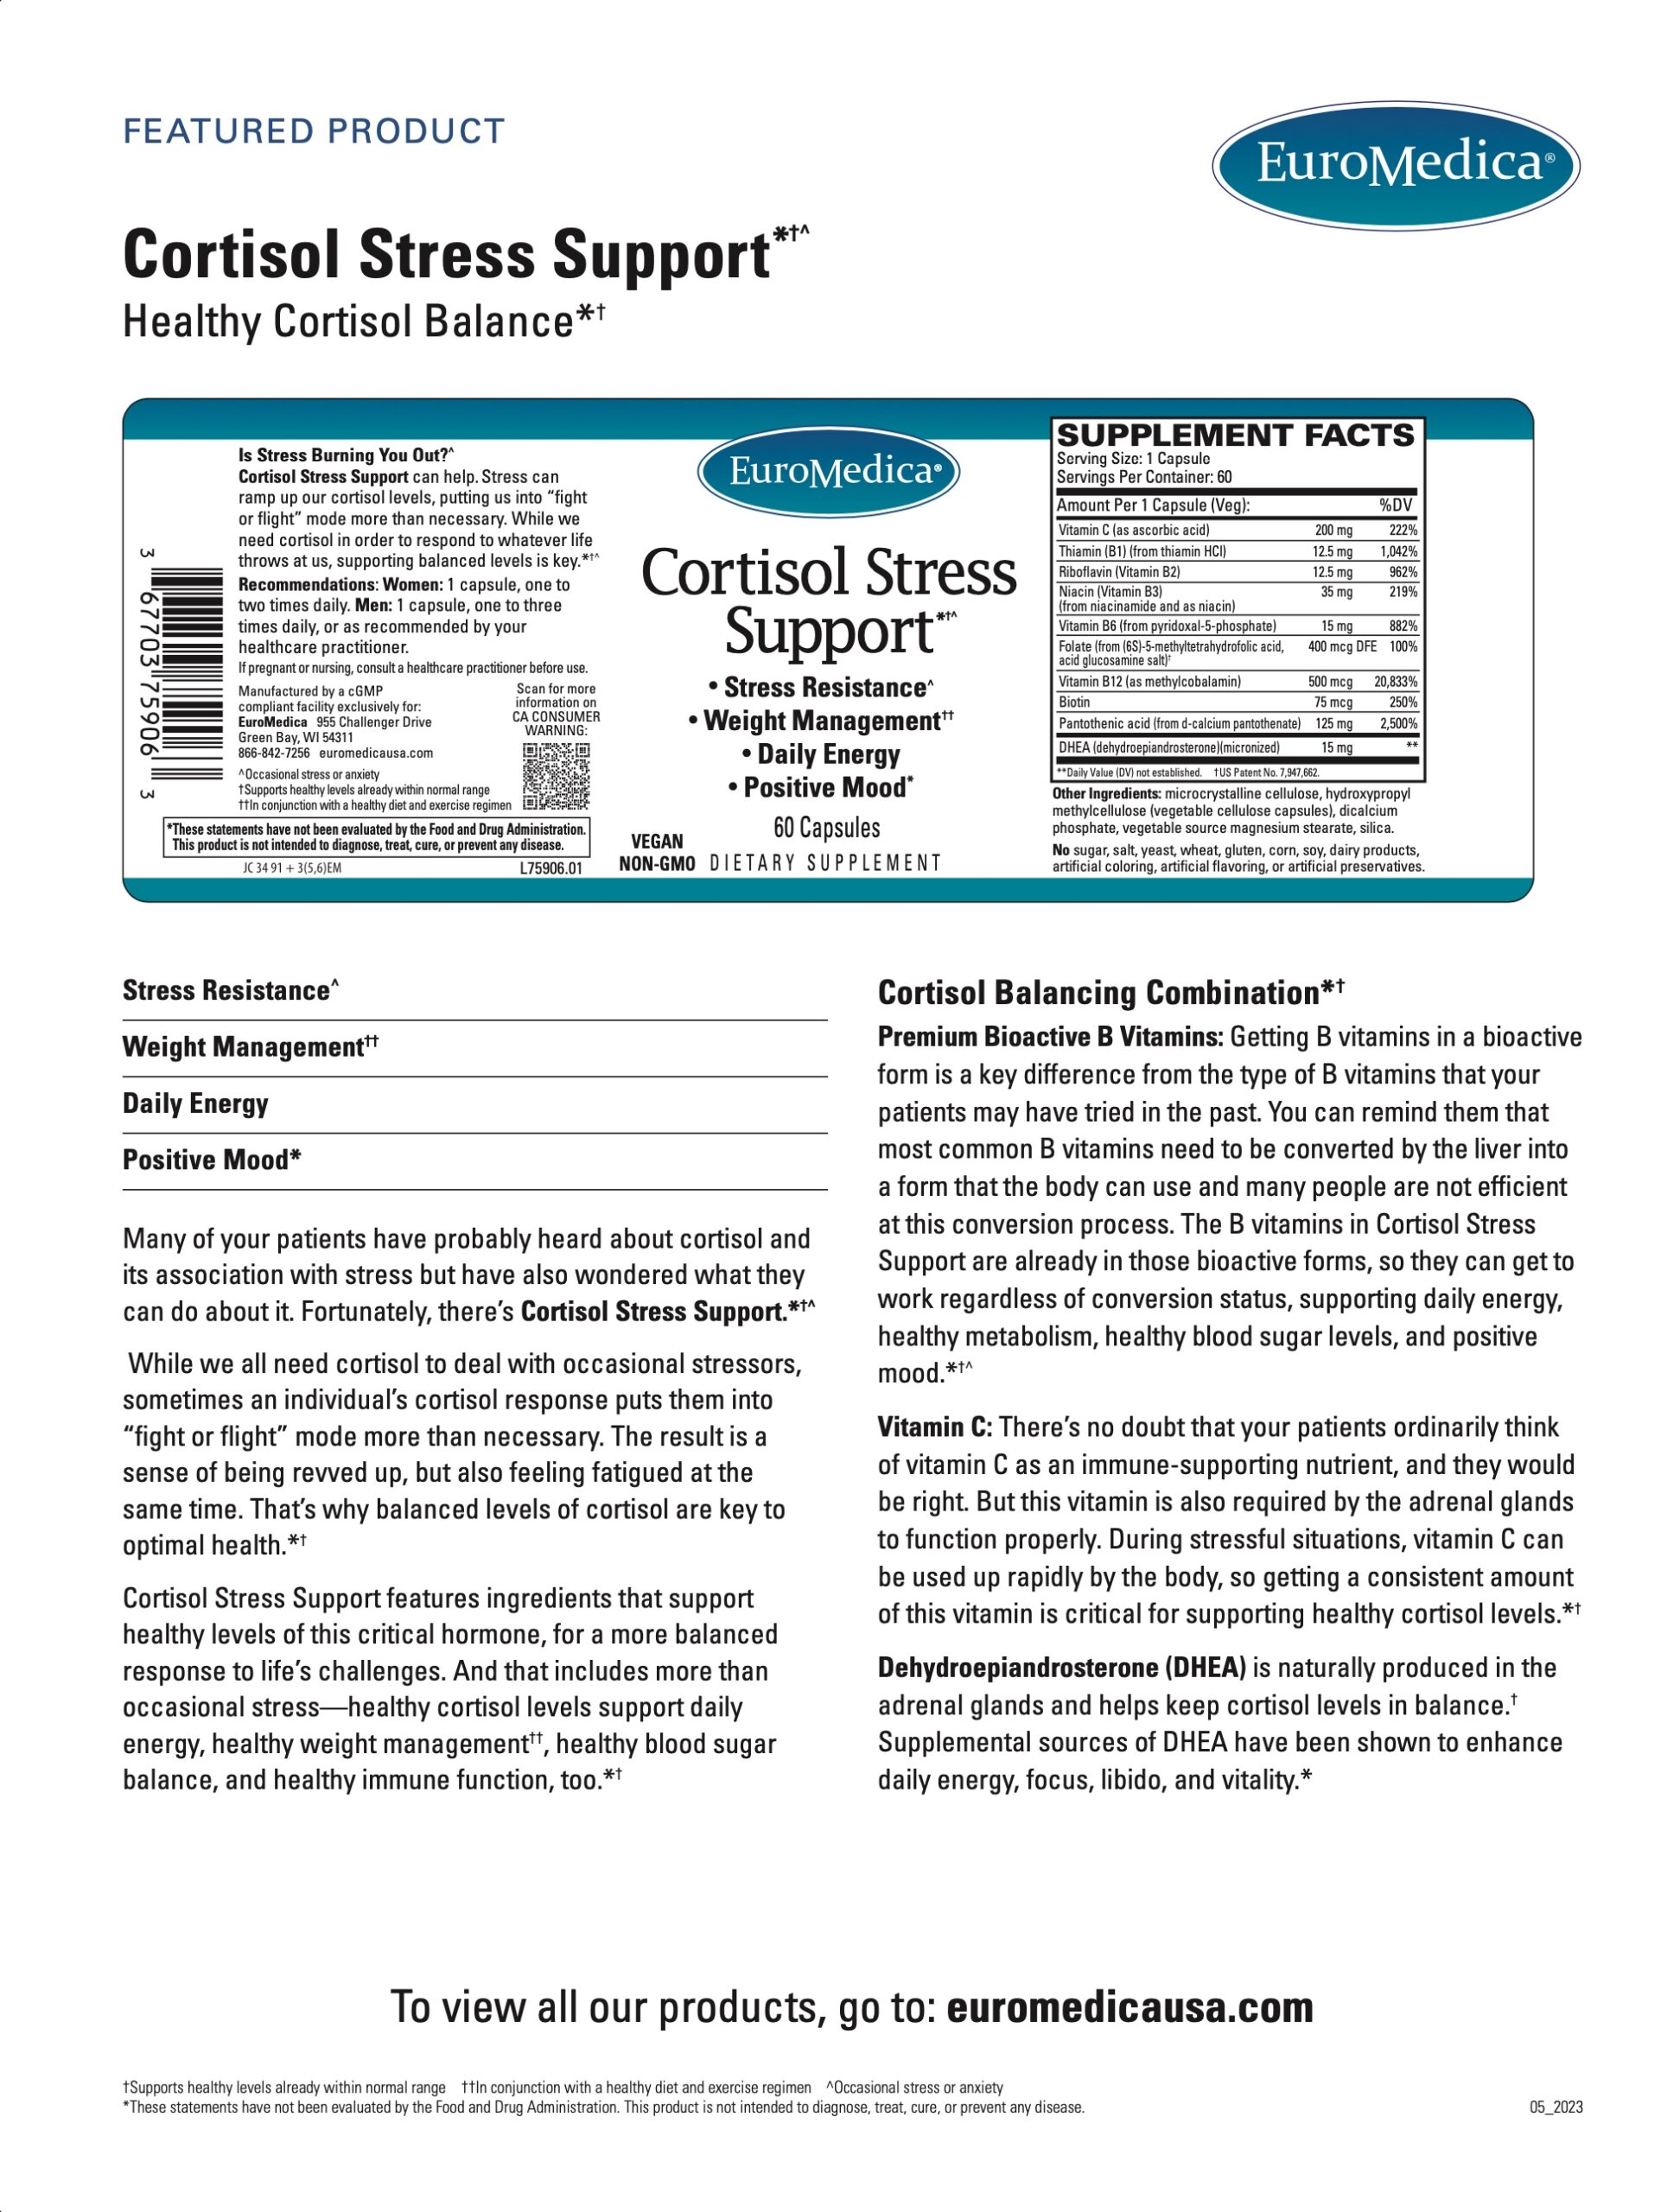 Cortisol Stress Support Sell Sheet thumbnail image